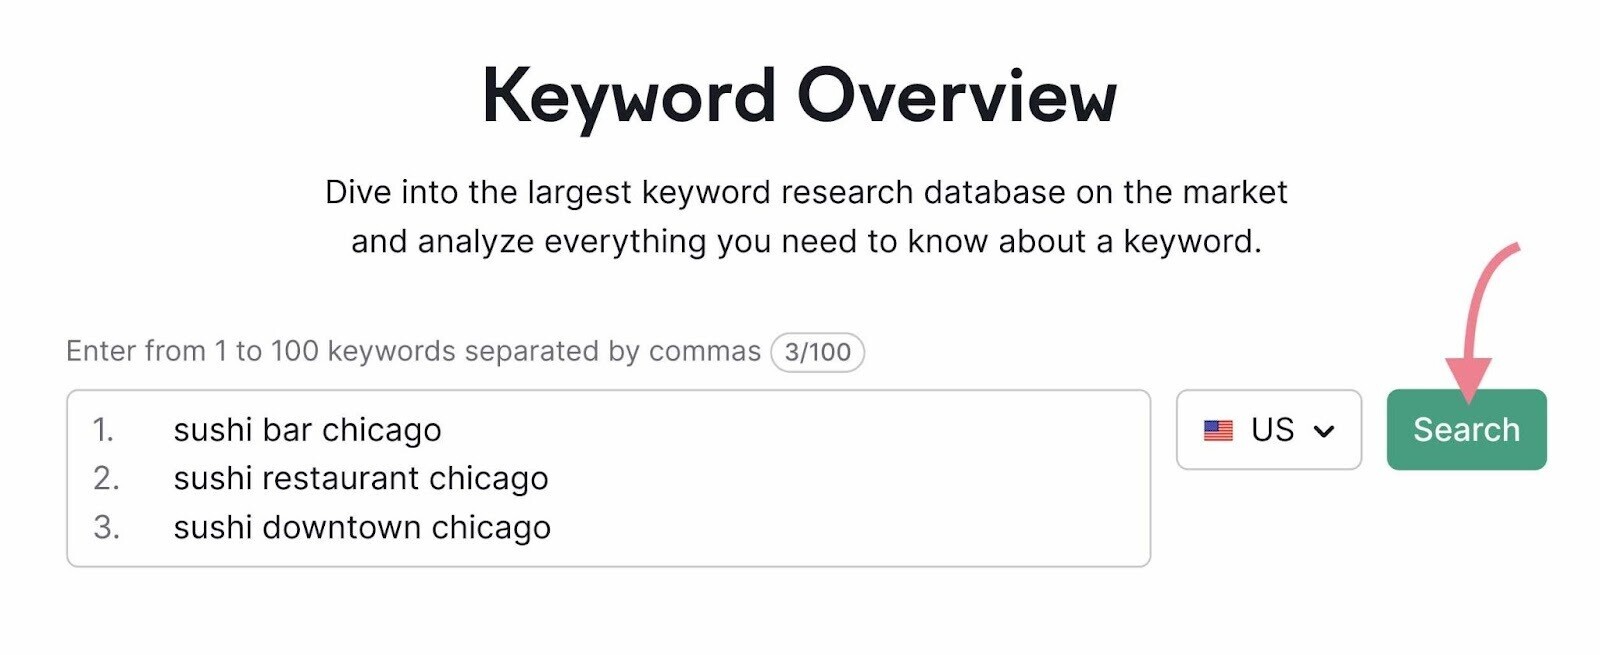 Keyword Overview tool